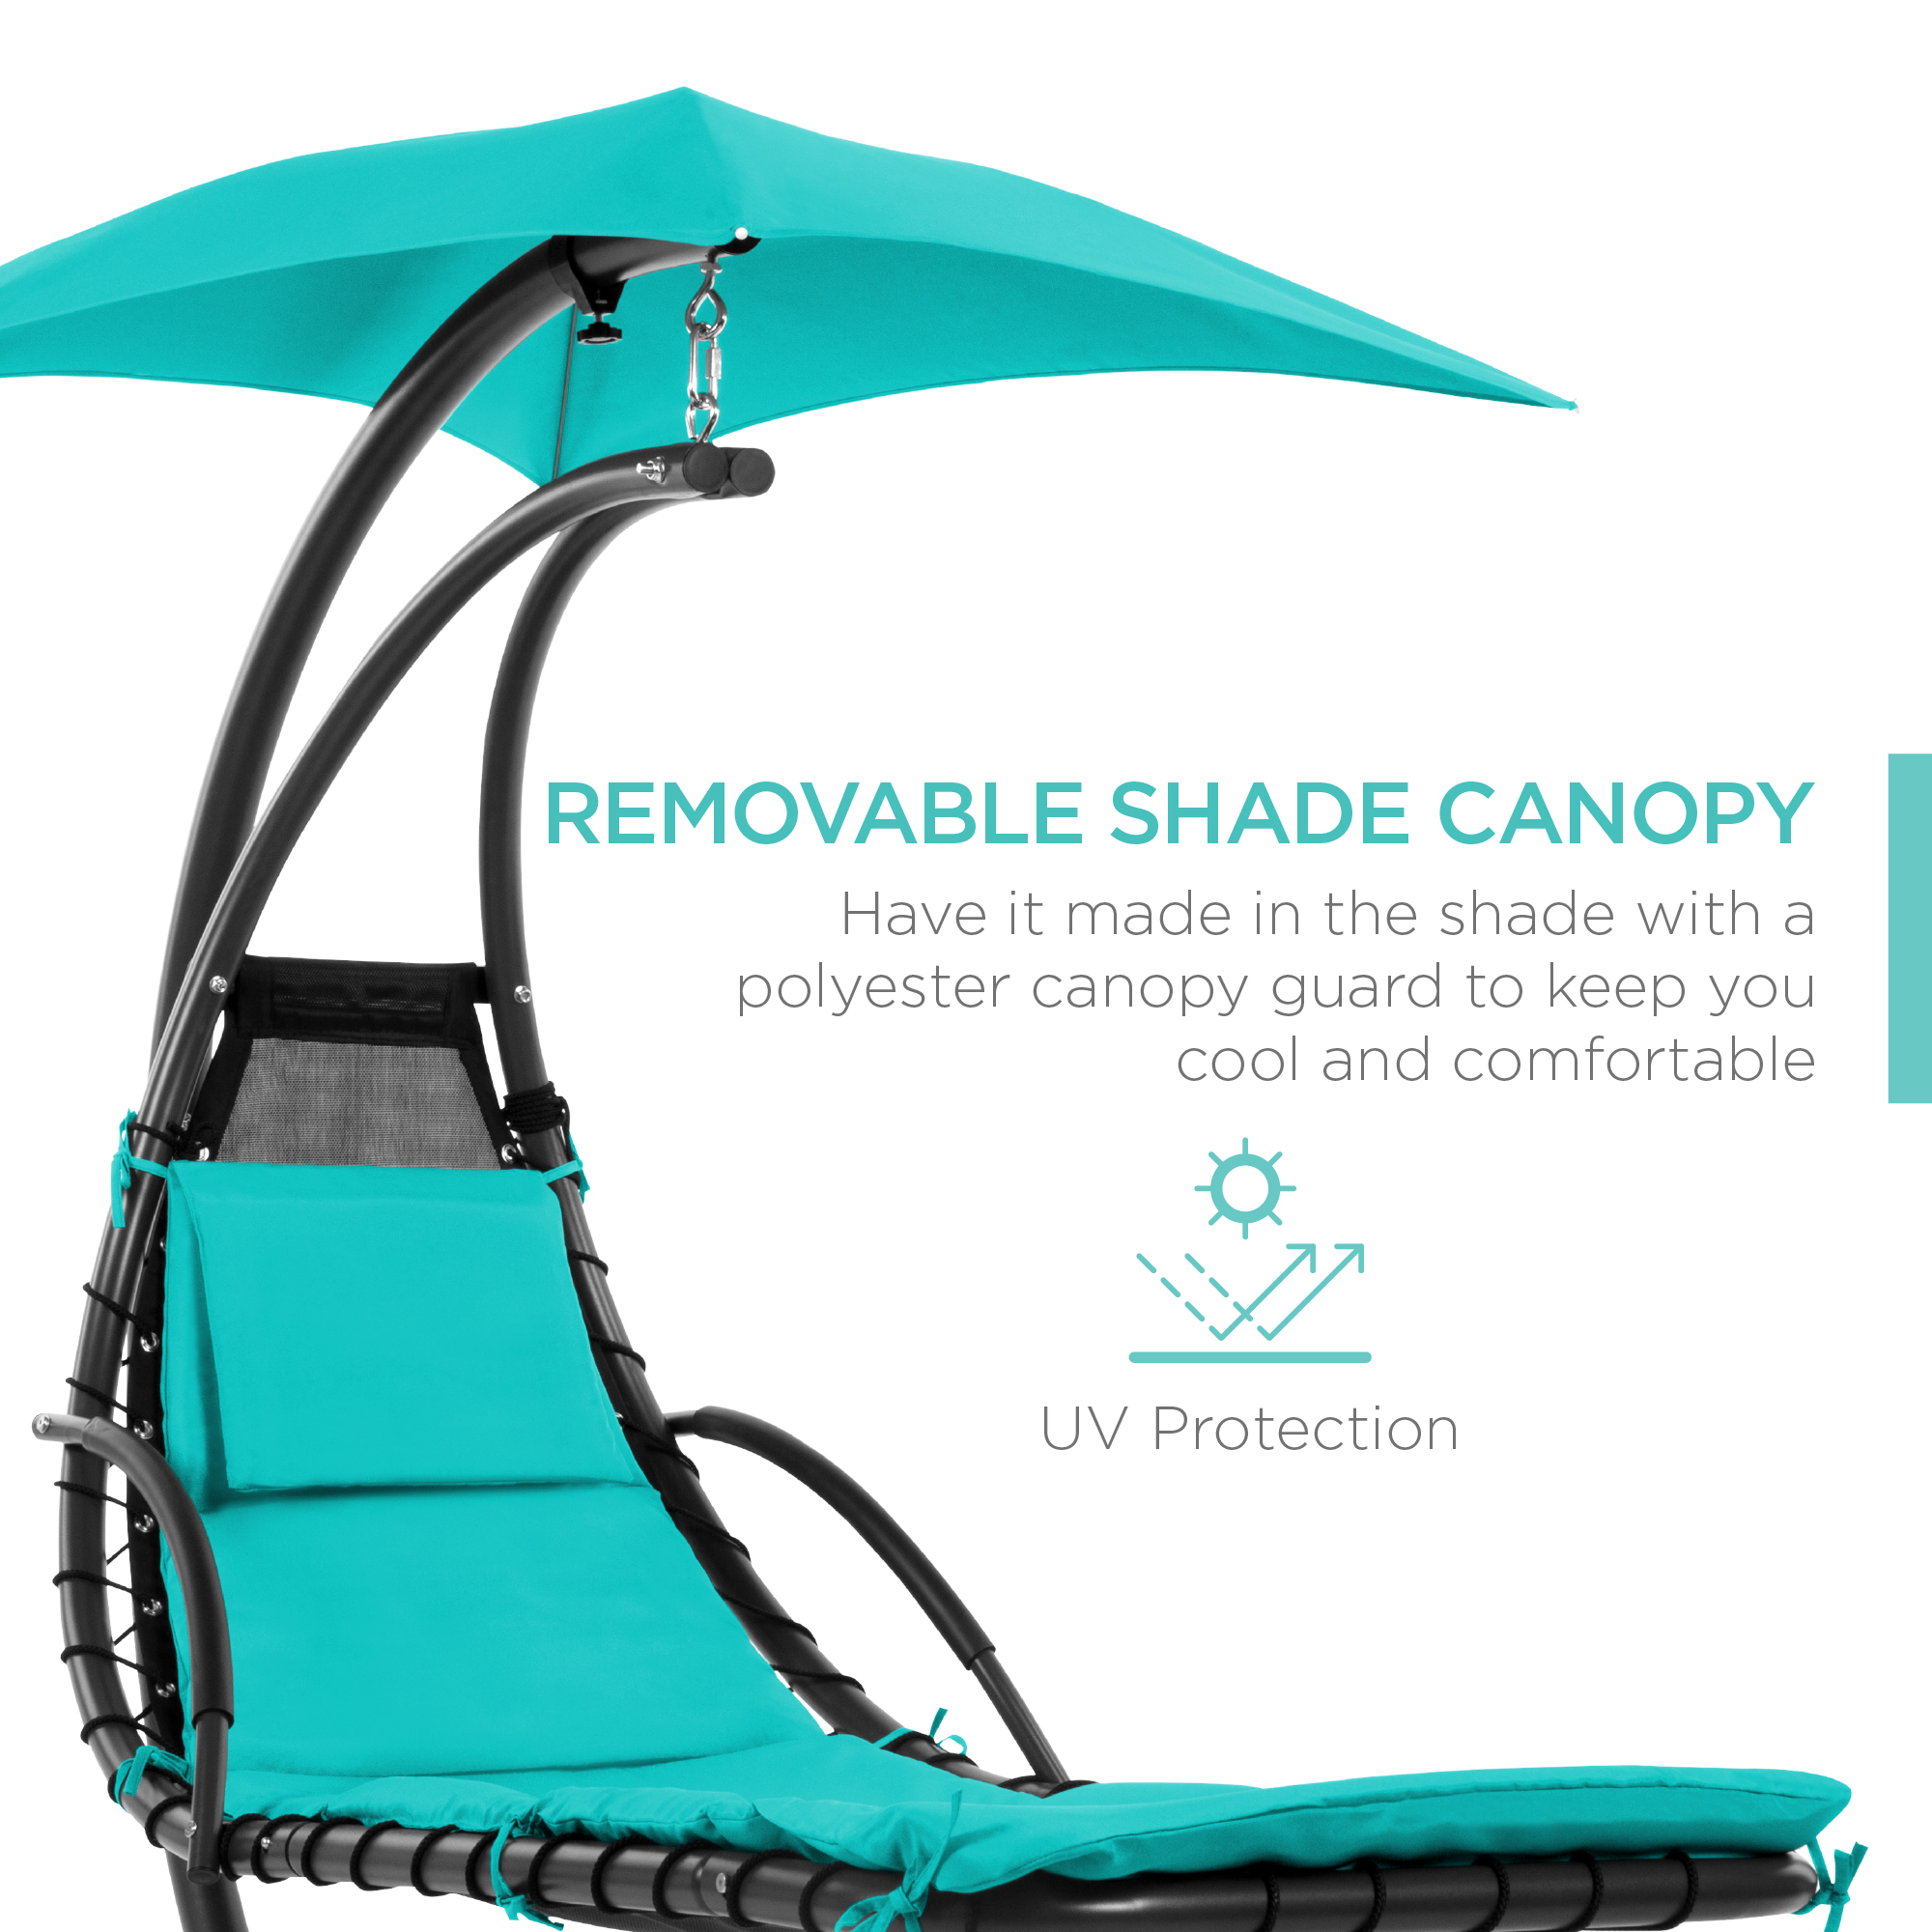 Best Choice Products Hanging Curved Chaise Lounge Chair Swing for Backyard, Patio w/ Pillow, Shade, Stand - Teal - image 4 of 8